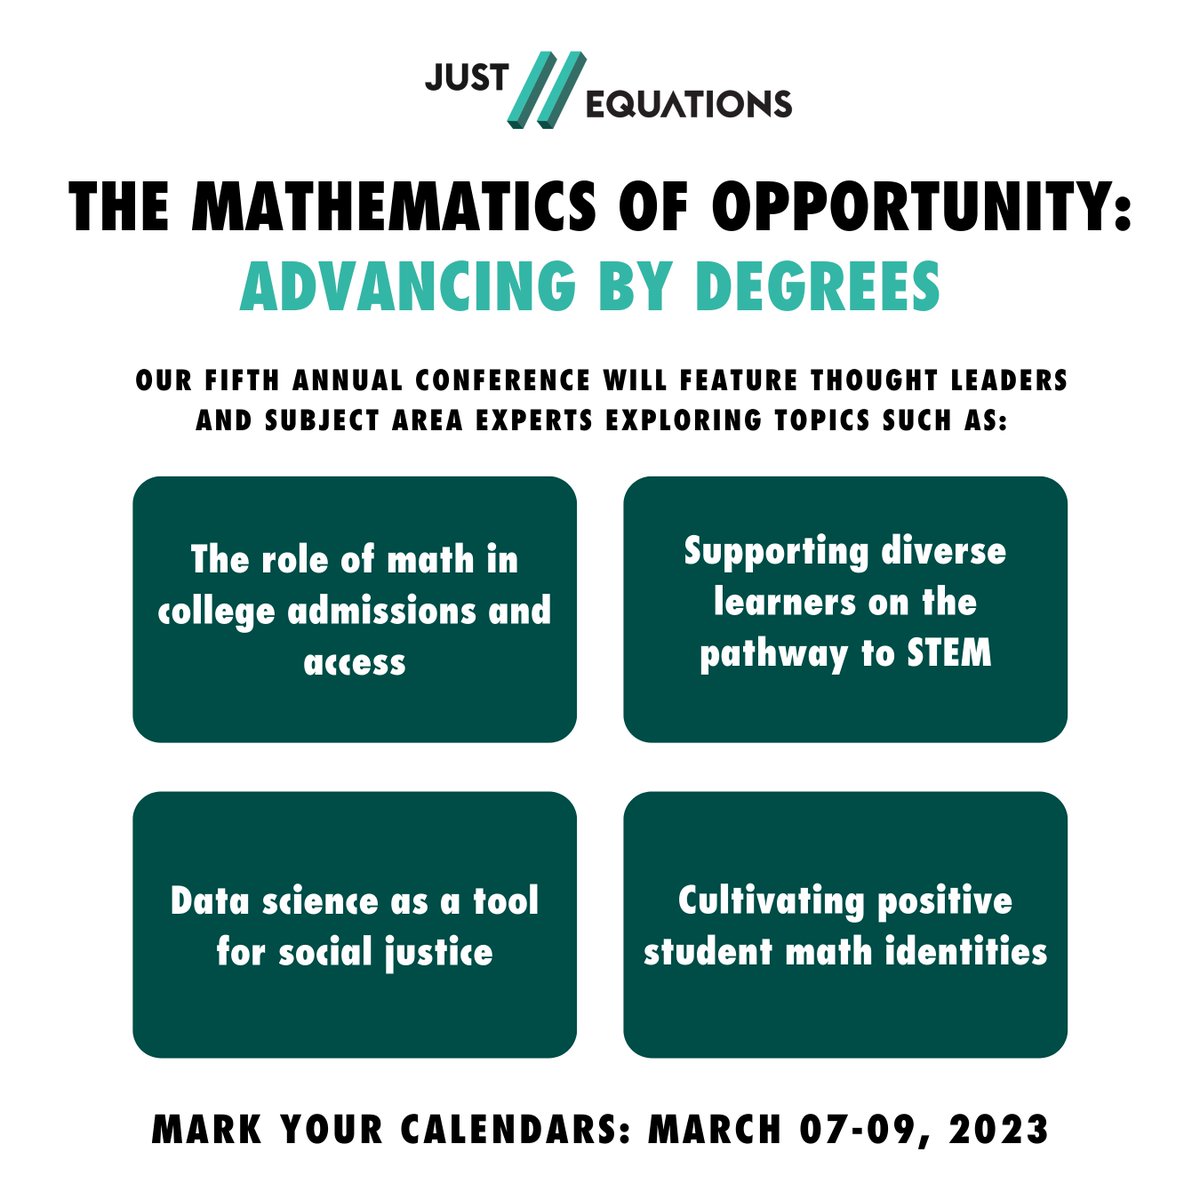 We’re thrilled to sponsor an upcoming panel at @JUST_Equations’ annual conference #TMO23! Join policymakers, advocates, and educators to consider how #math #education can be a force for opportunity and change. Register today: bit.ly/3CL71xK #TMO23 #JUST_Equations